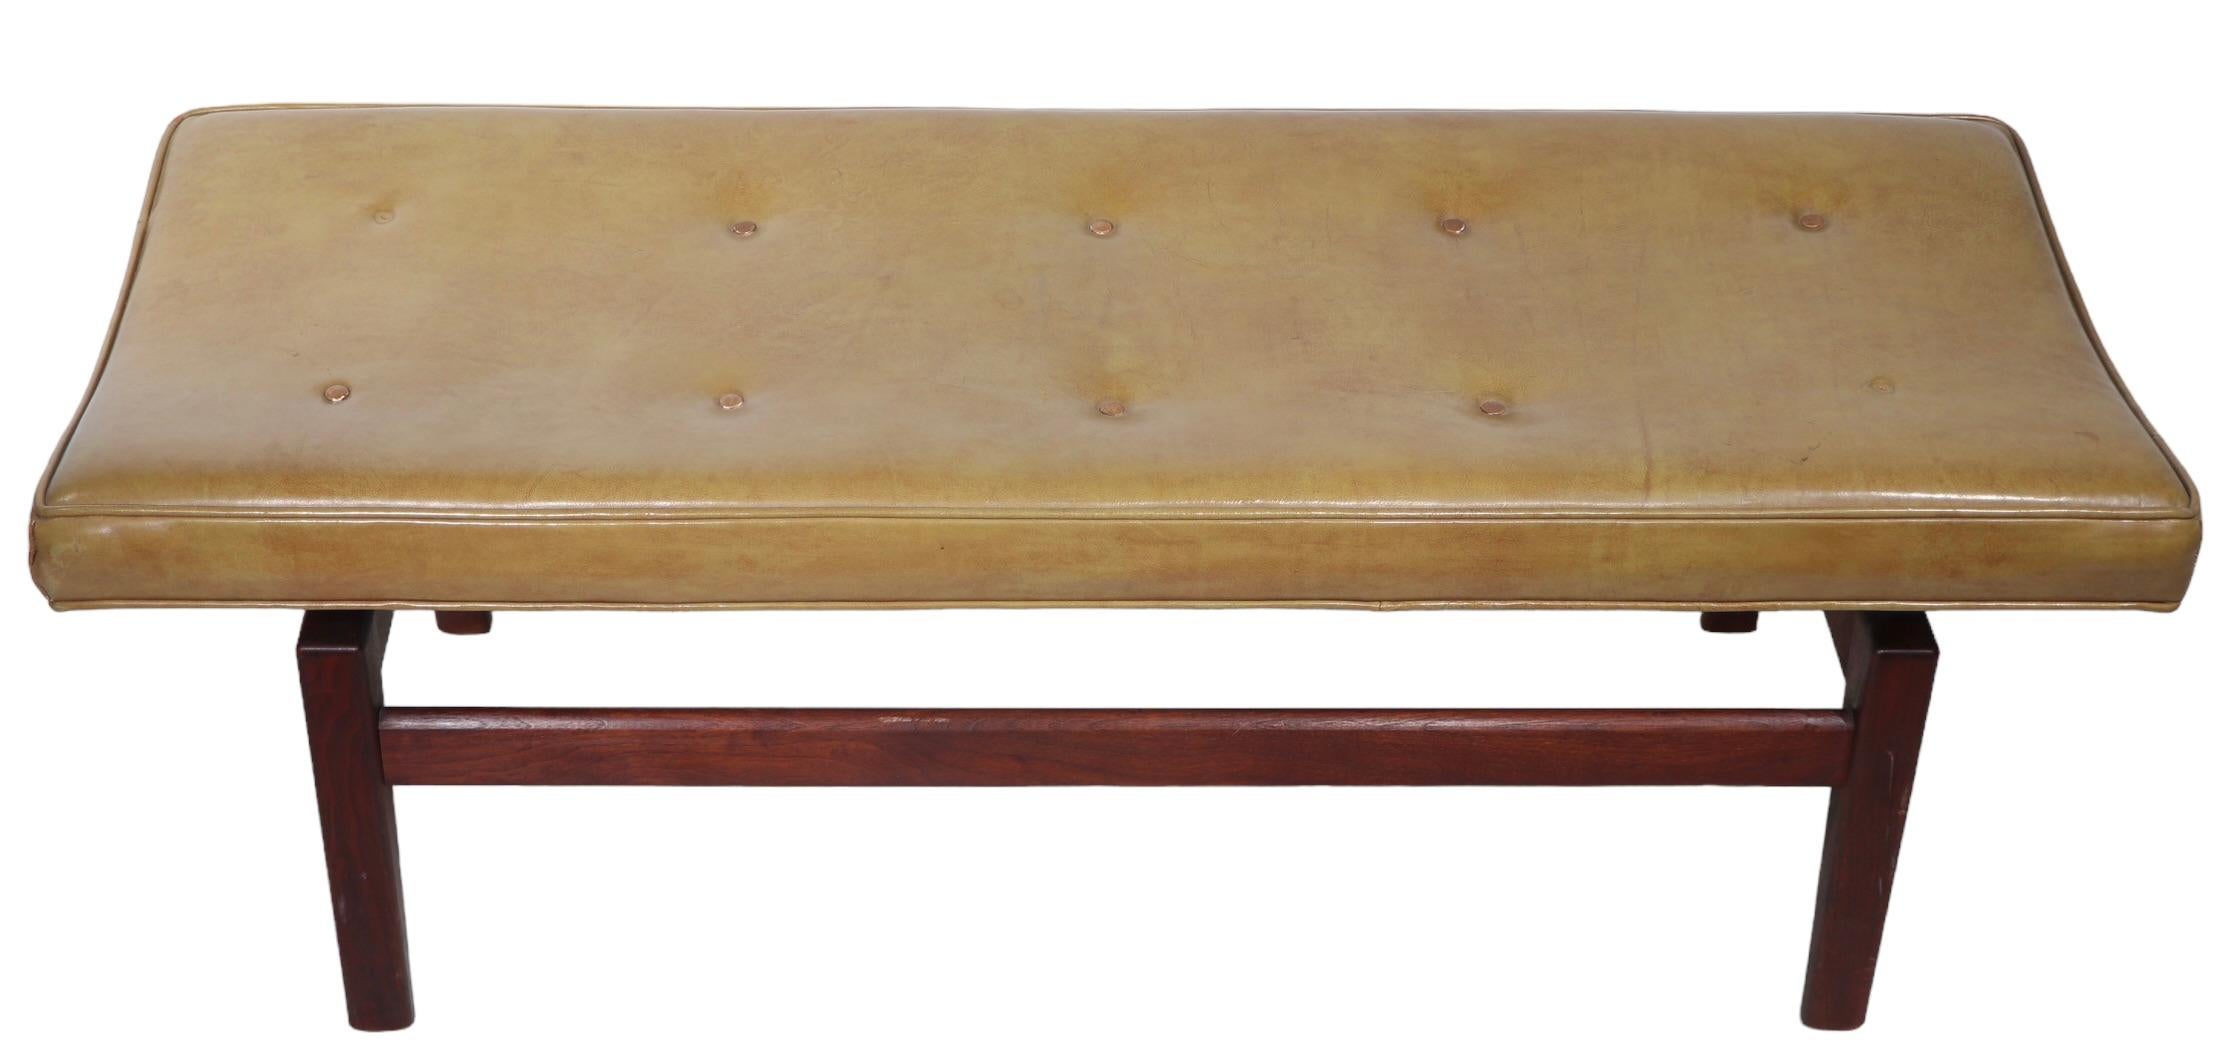   Architectural Mid Century Jens Risom Bench with Walnut Legs and Leather Top  For Sale 2